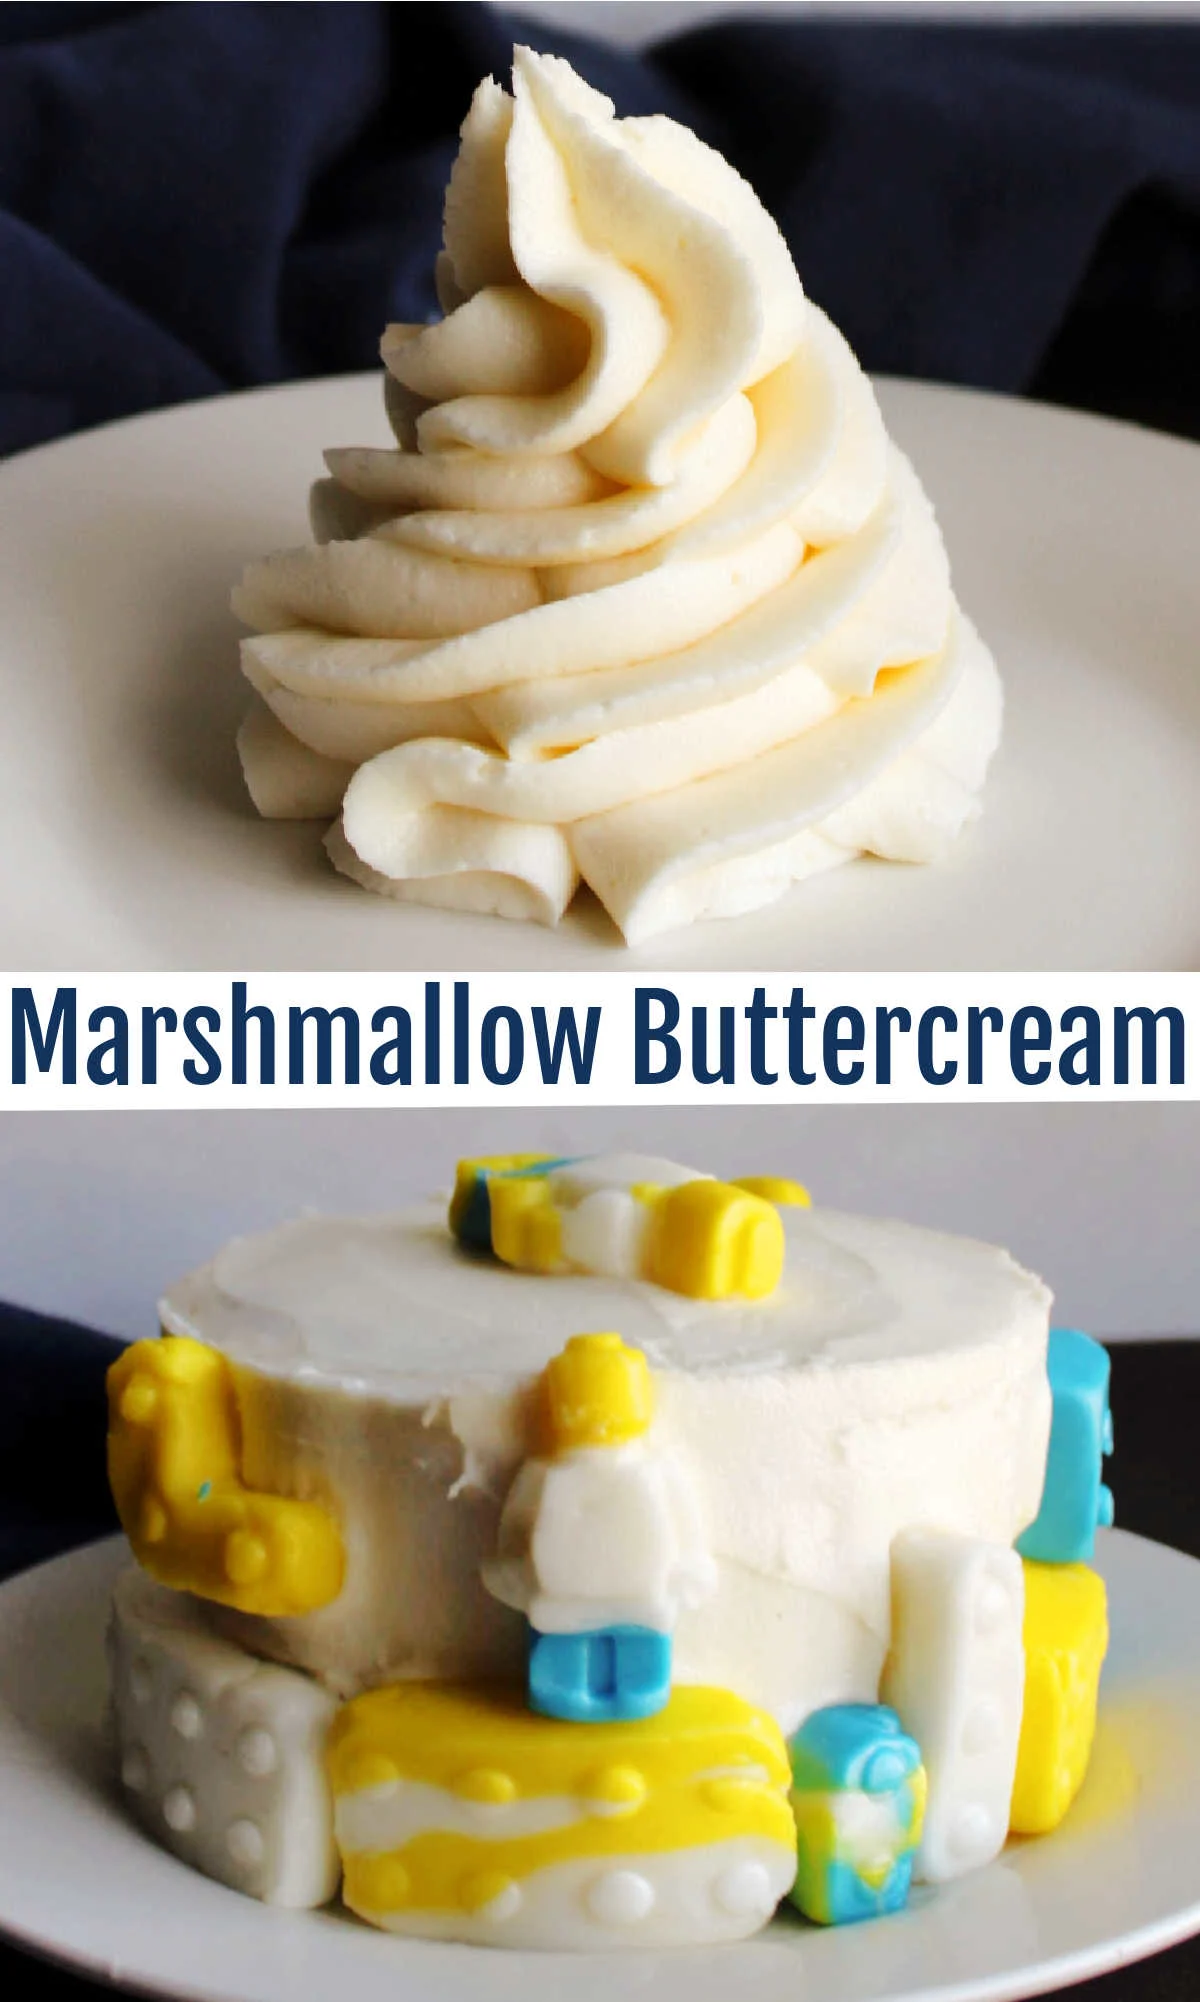 This fluffy buttercream has real marshmallows mixed right into the frosting. It is relatively stable, super delicious and lots of fun.